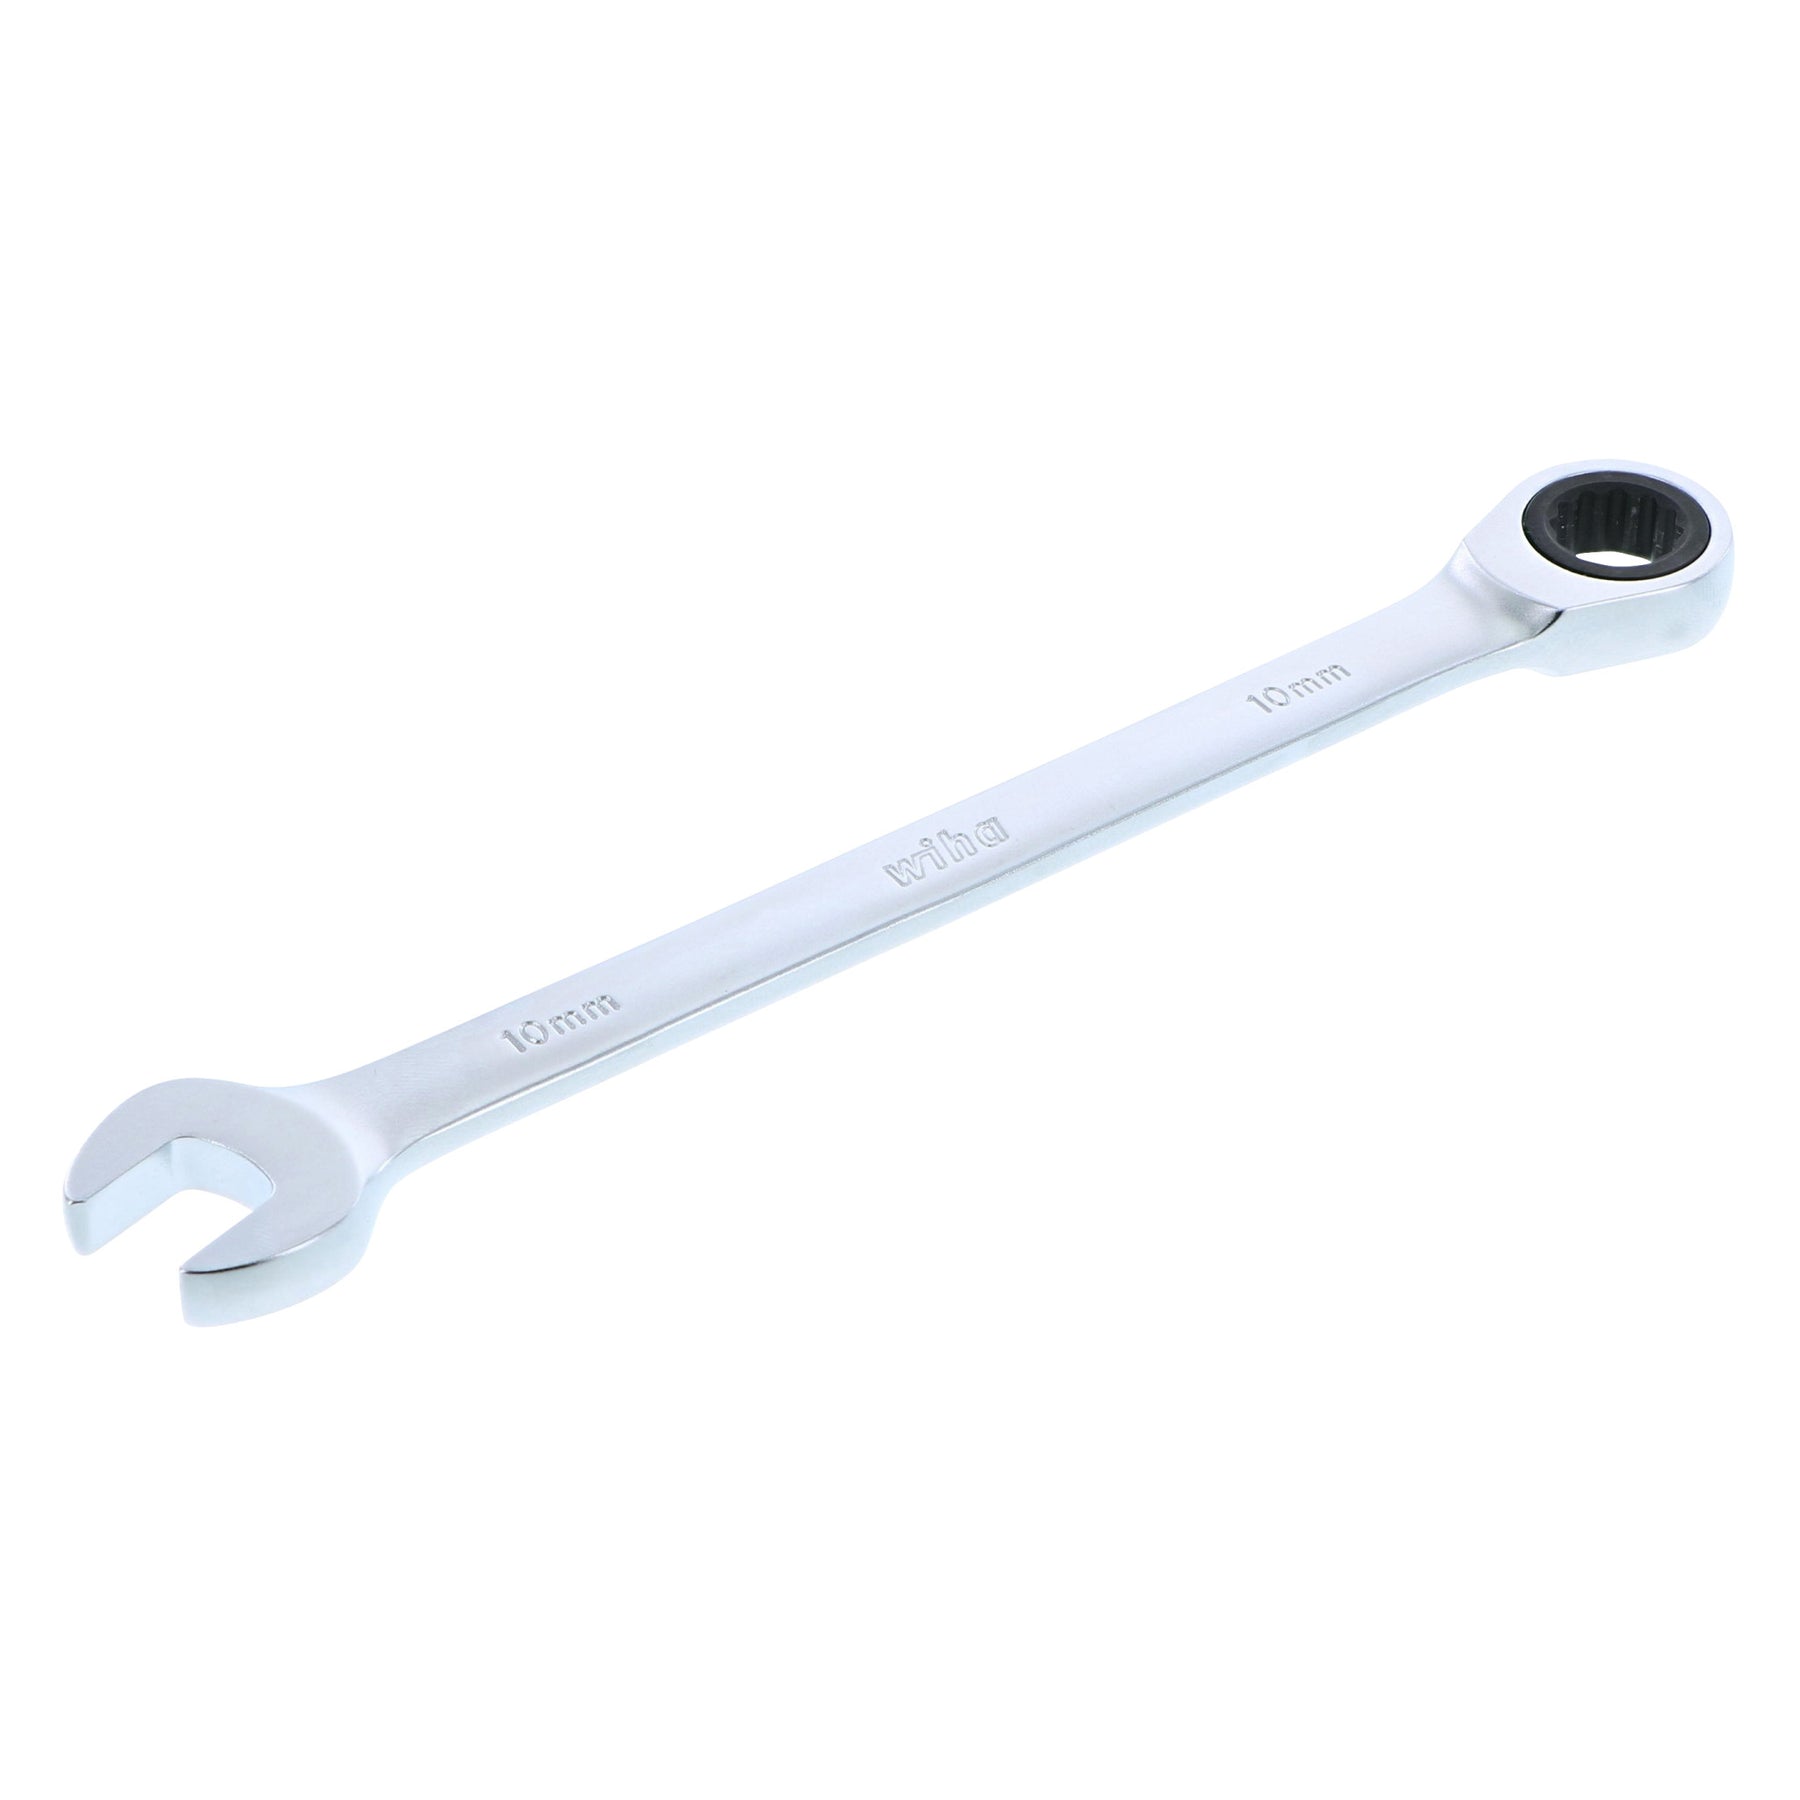 Combination Ratchet Wrench 10mm